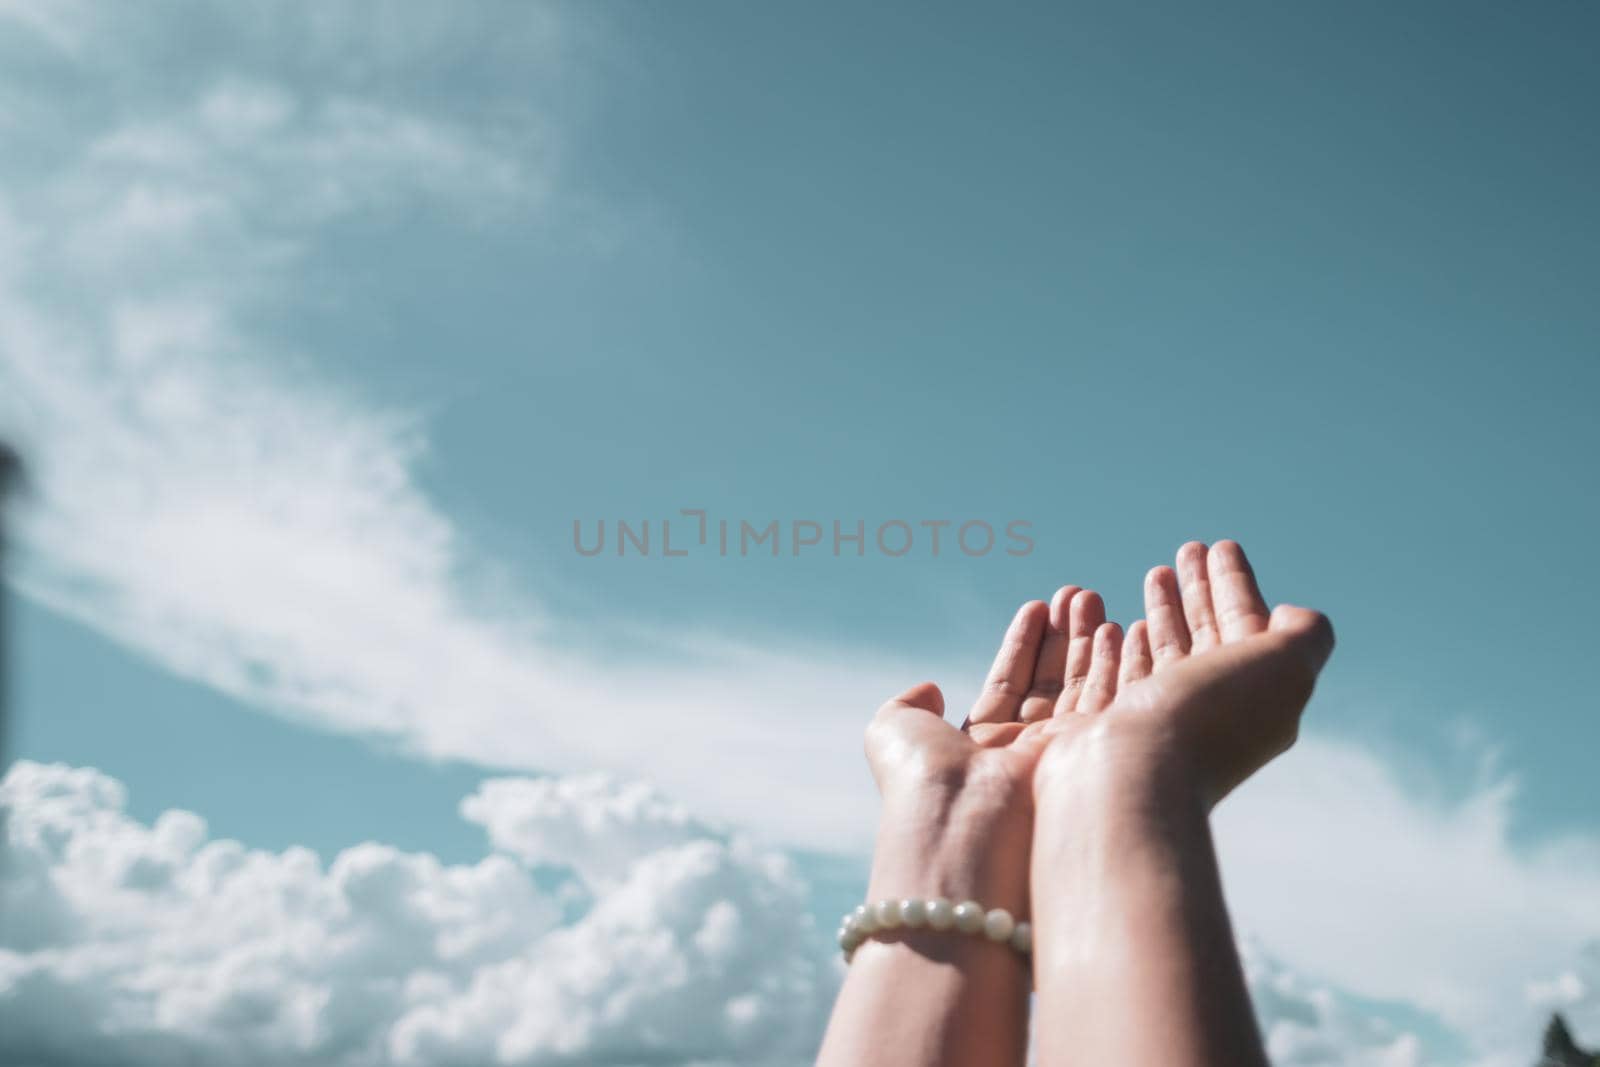 Woman hands place together like praying in front of nature blue sky background.